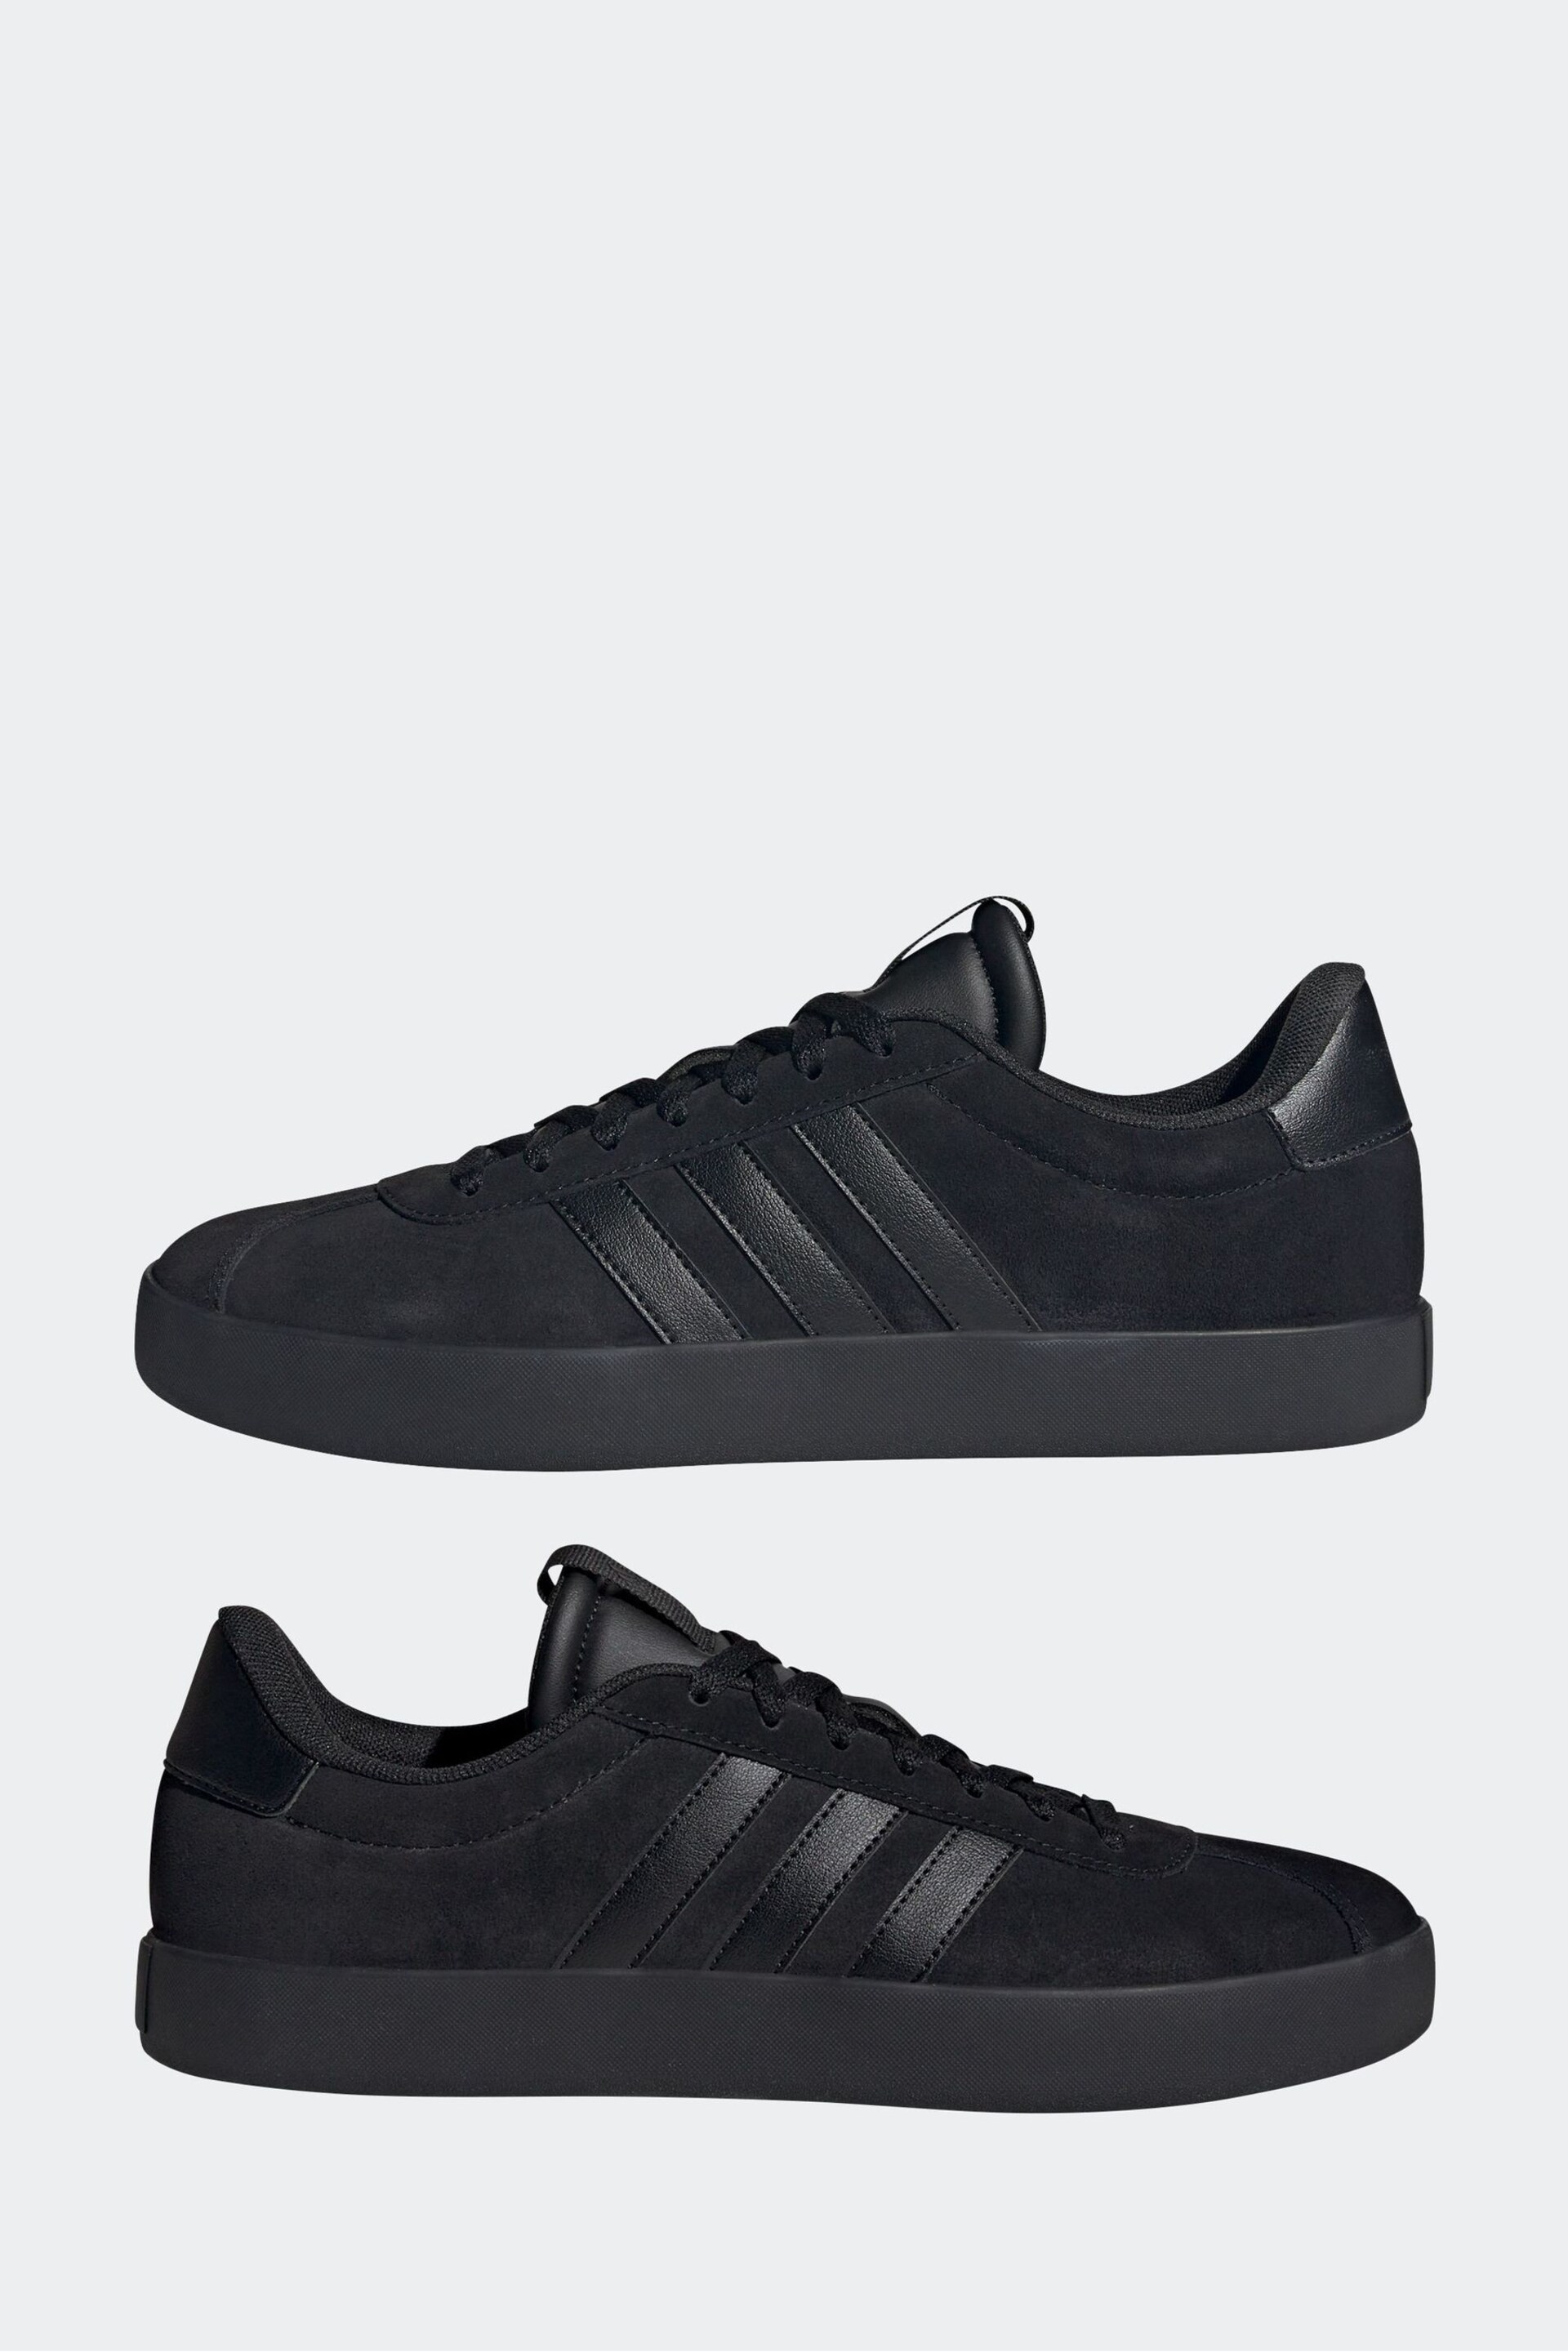 adidas Black VL Court 3.0 Trainers - Image 5 of 9